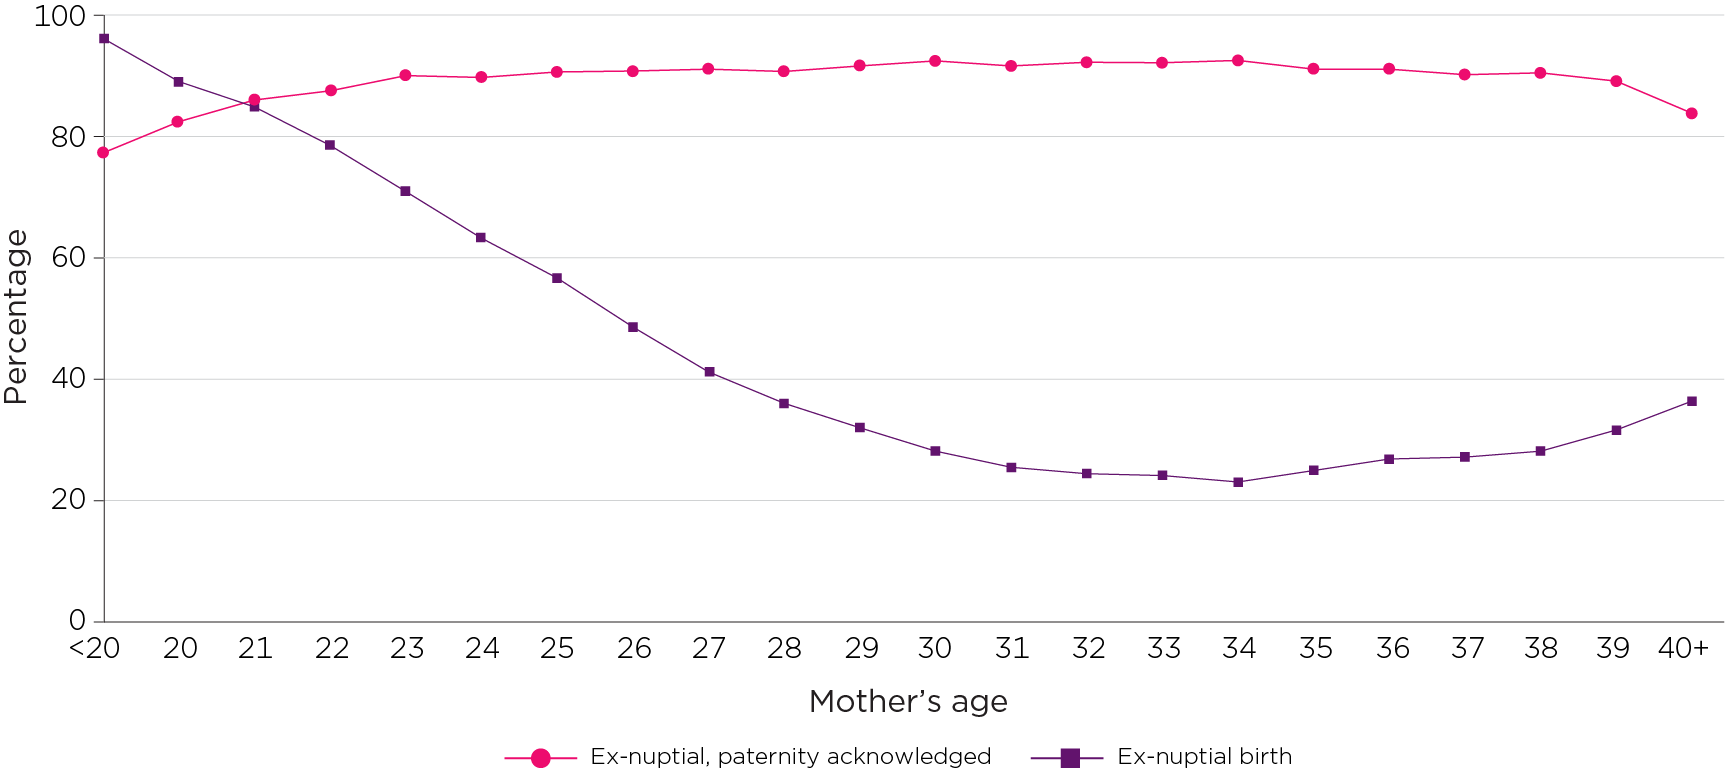 Figure 7: Proportion of births outside marriage and proportion of ex-nuptial births with paternity acknowledgement by age of mothers, 2020.